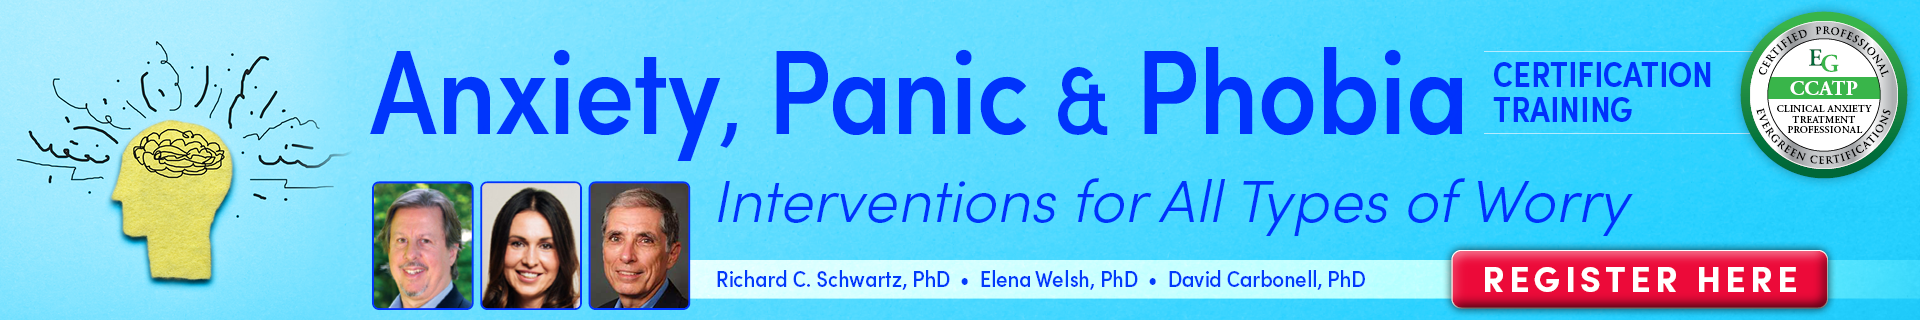 Anxiety, Panic, & Phobia Certification Training: Interventions for All Types of Worry